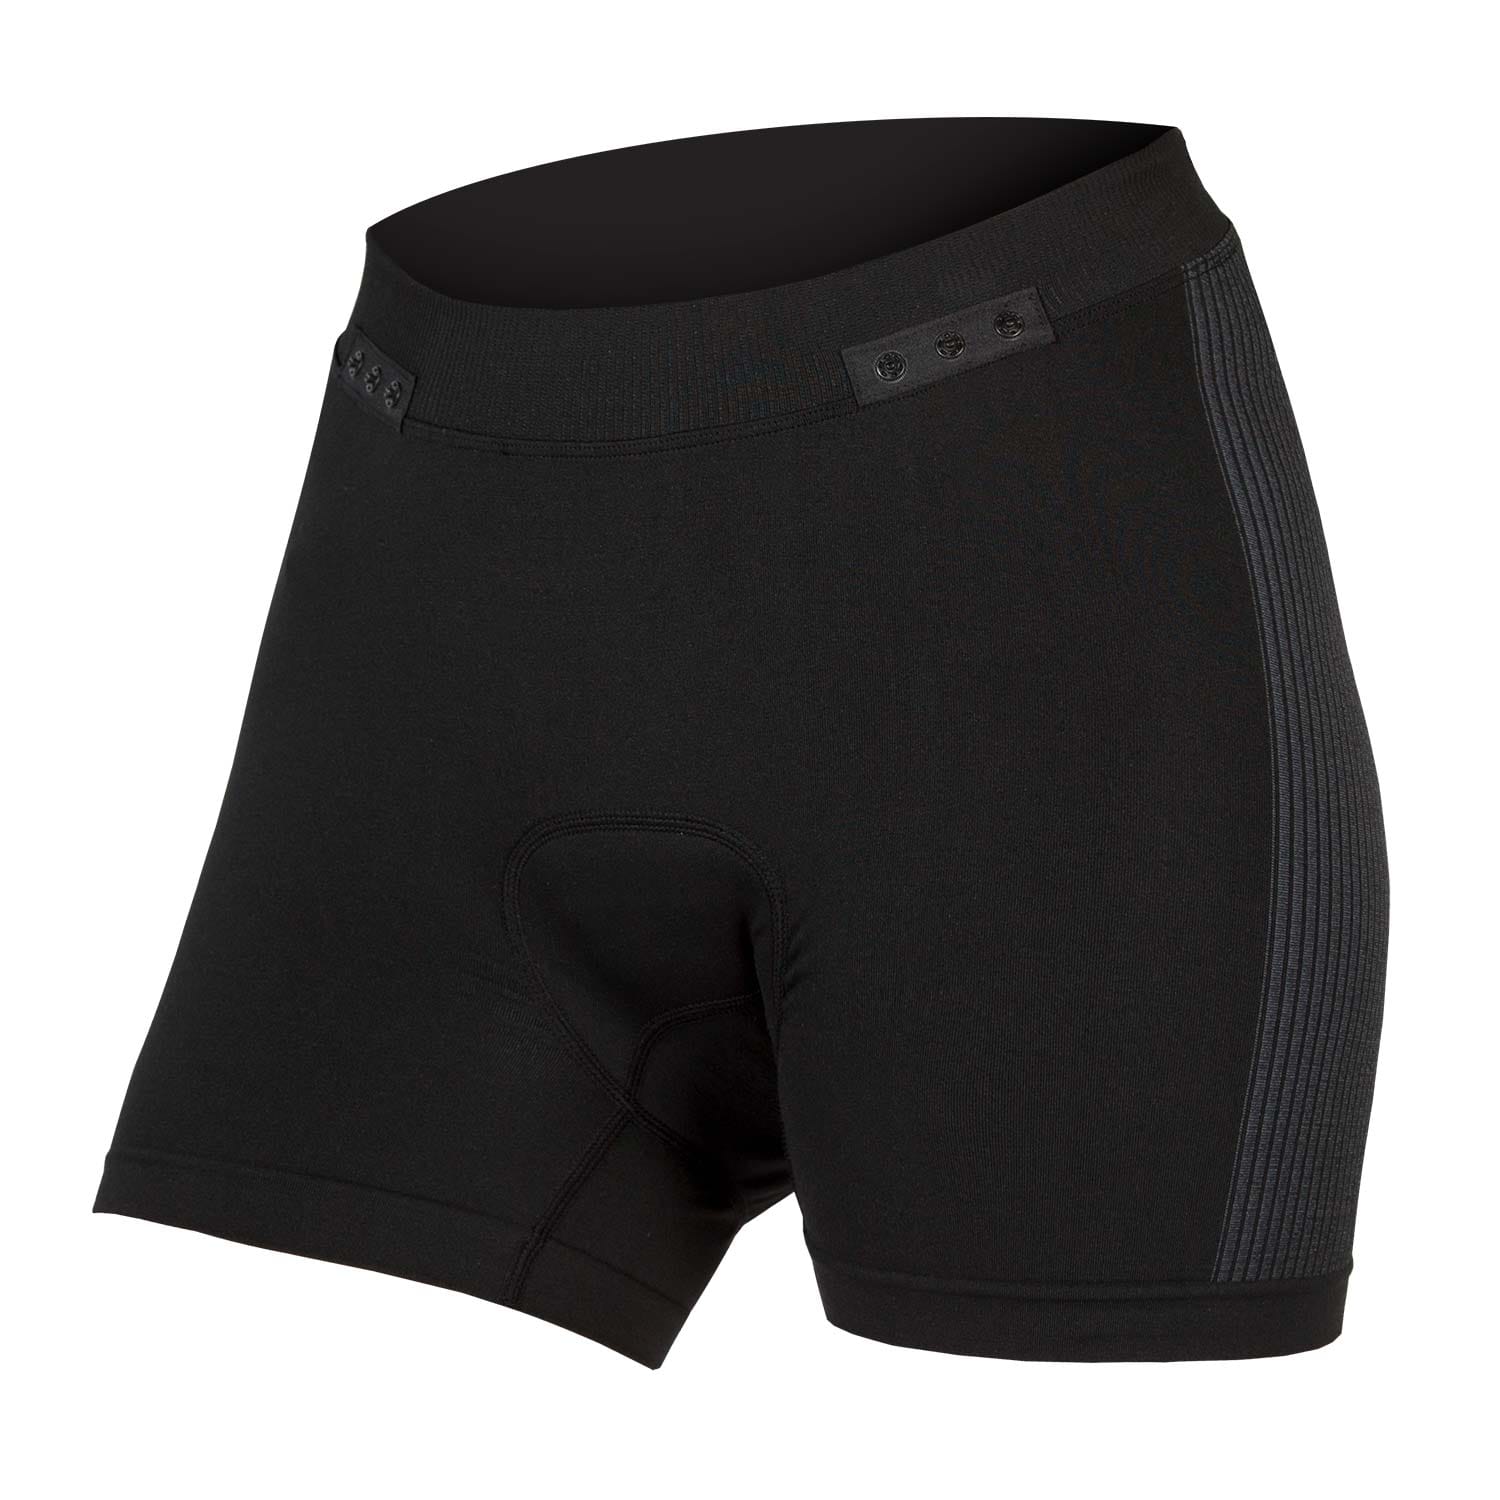 ENDURA WOMEN'S ENGINEERED PADDED BOXER WITH CLICKFAST